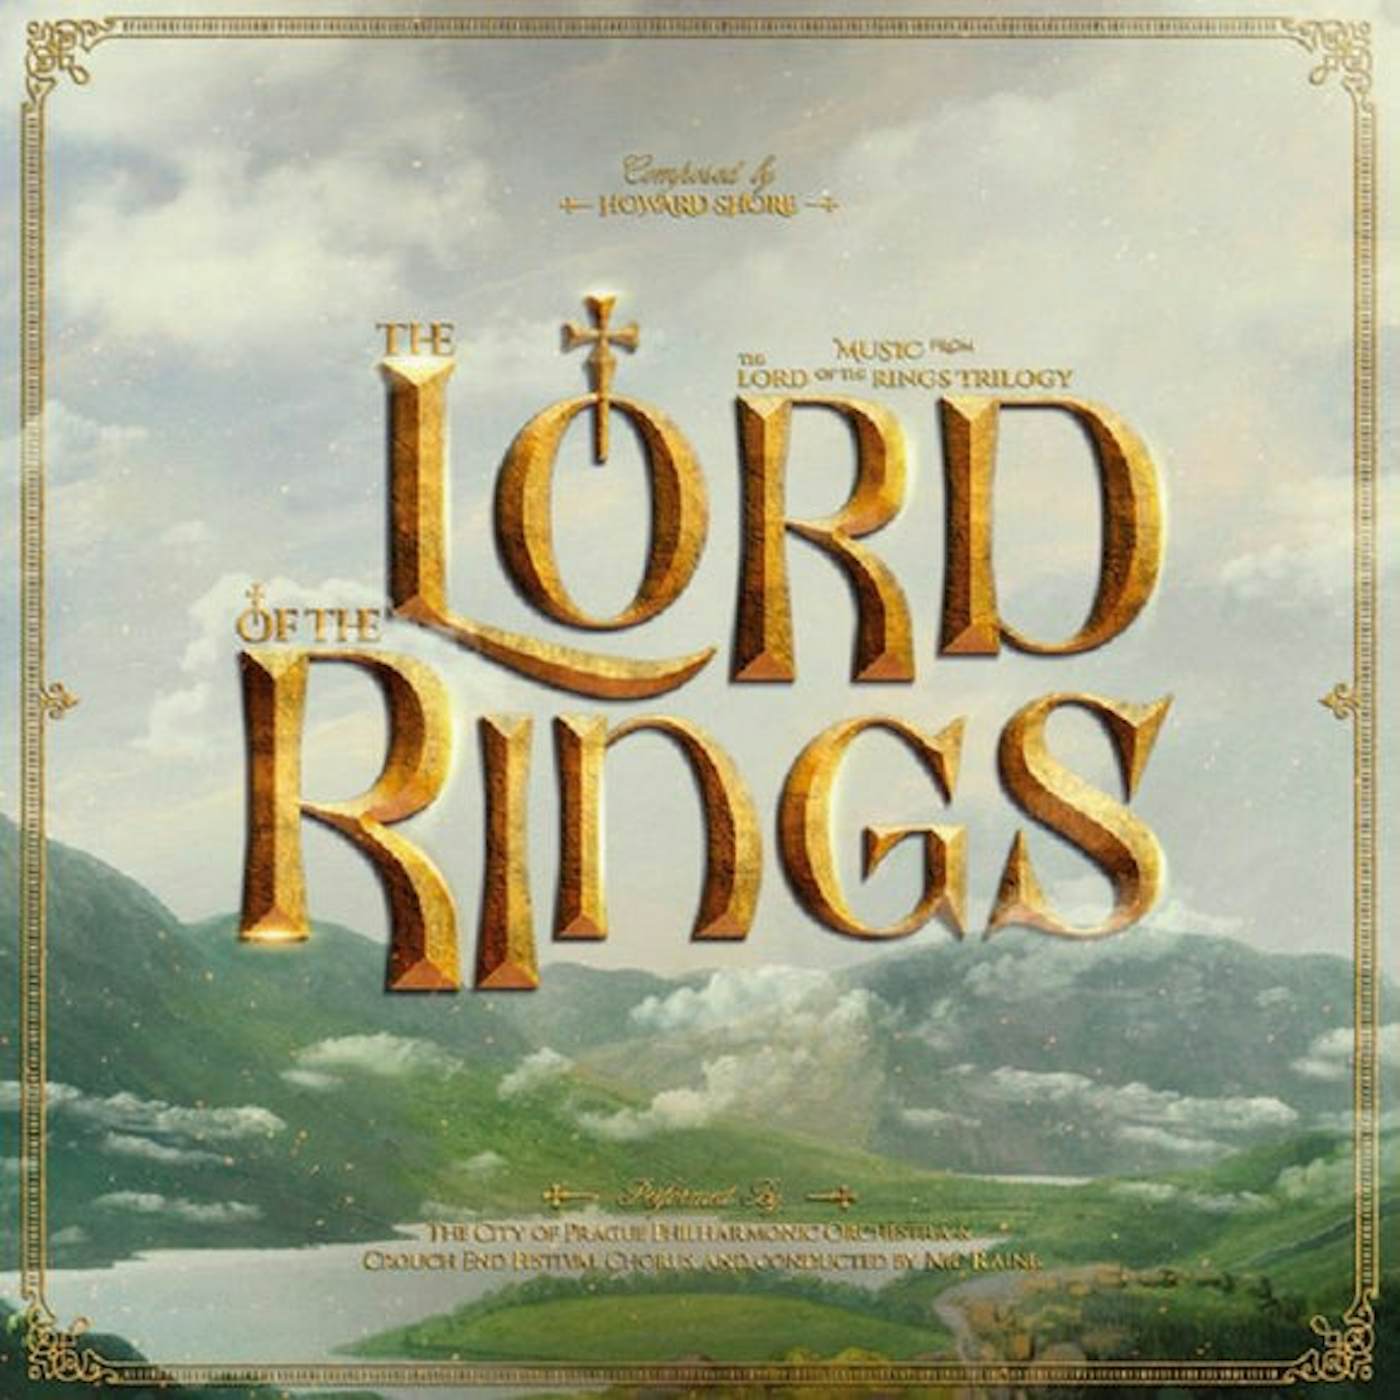 The City of Prague Philharmonic Orchestra LORD OF THE RINGS TRILOGY (3LP/LIMITED) Vinyl Record